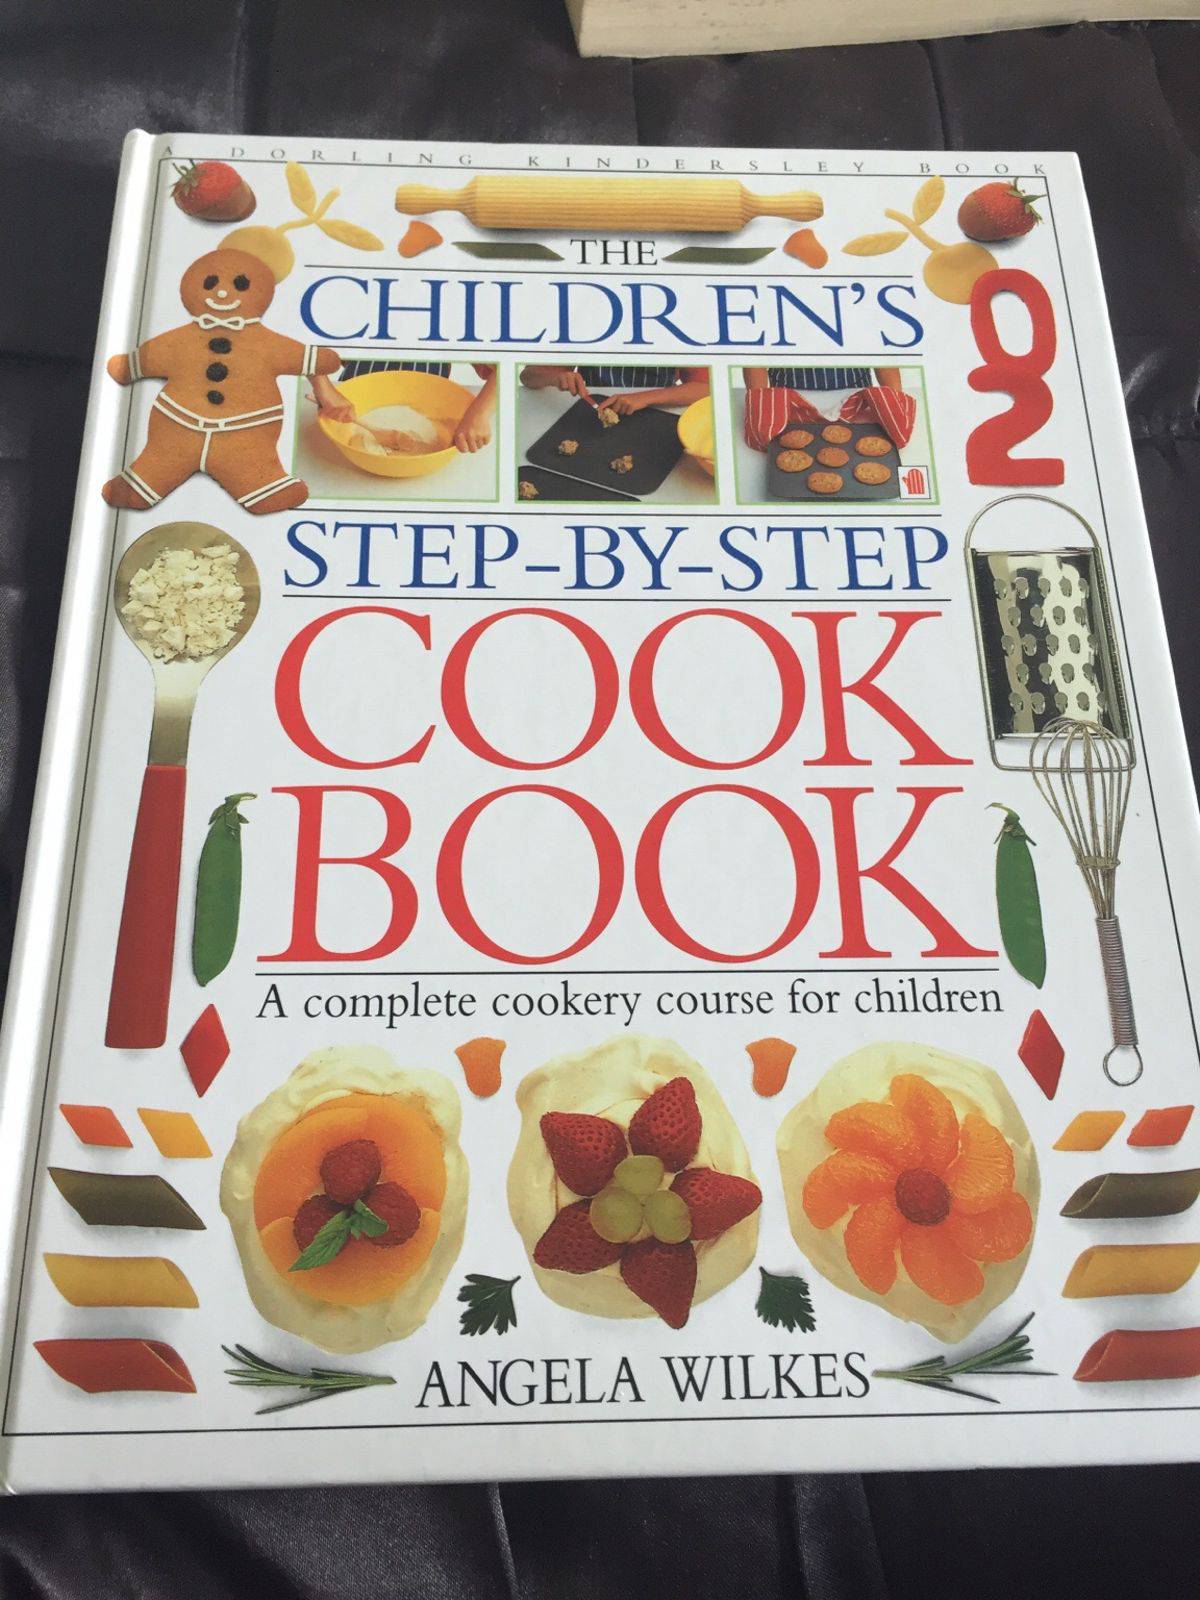 The children's step-by-step cook book by Angela Wilkes